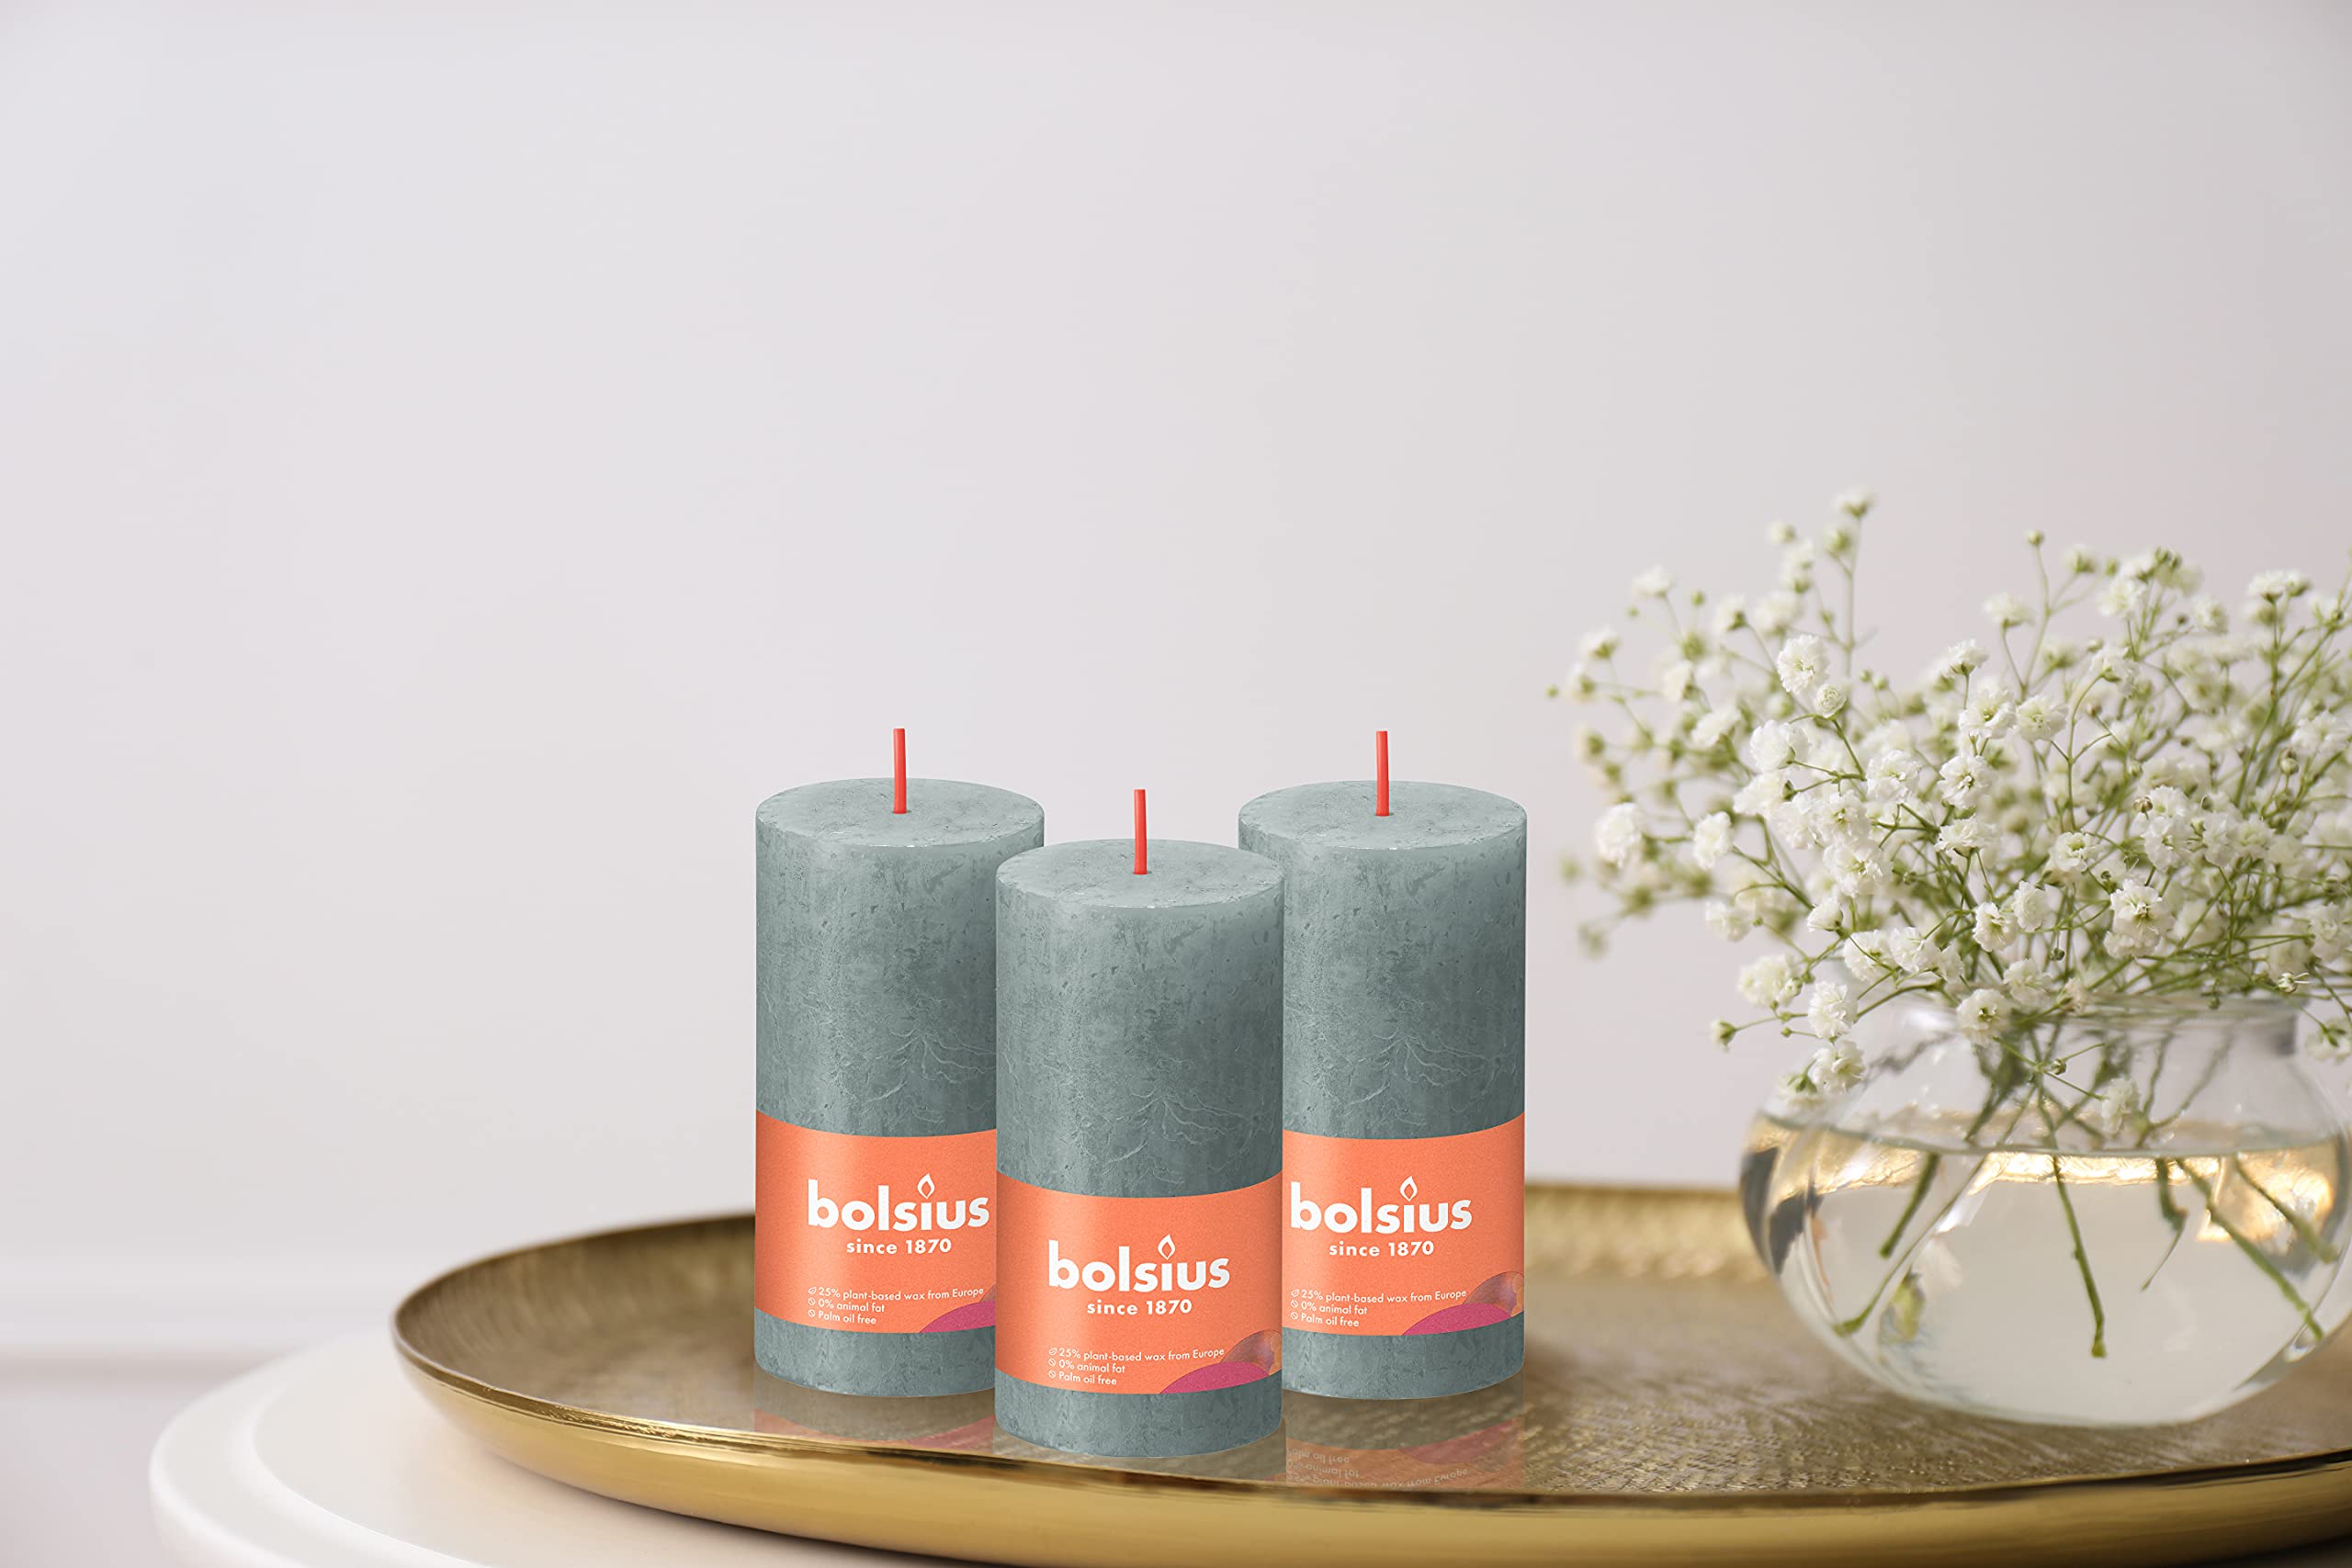 BOLSIUS 4 Pack Eucalyptus Green Rustic Pillar Candles - 2 X 4 Inches - Premium European Quality - Includes Natural Plant-Based Wax - Unscented Dripless Smokeless 30 Hour Party and Wedding Candles  - Collectible Very Good